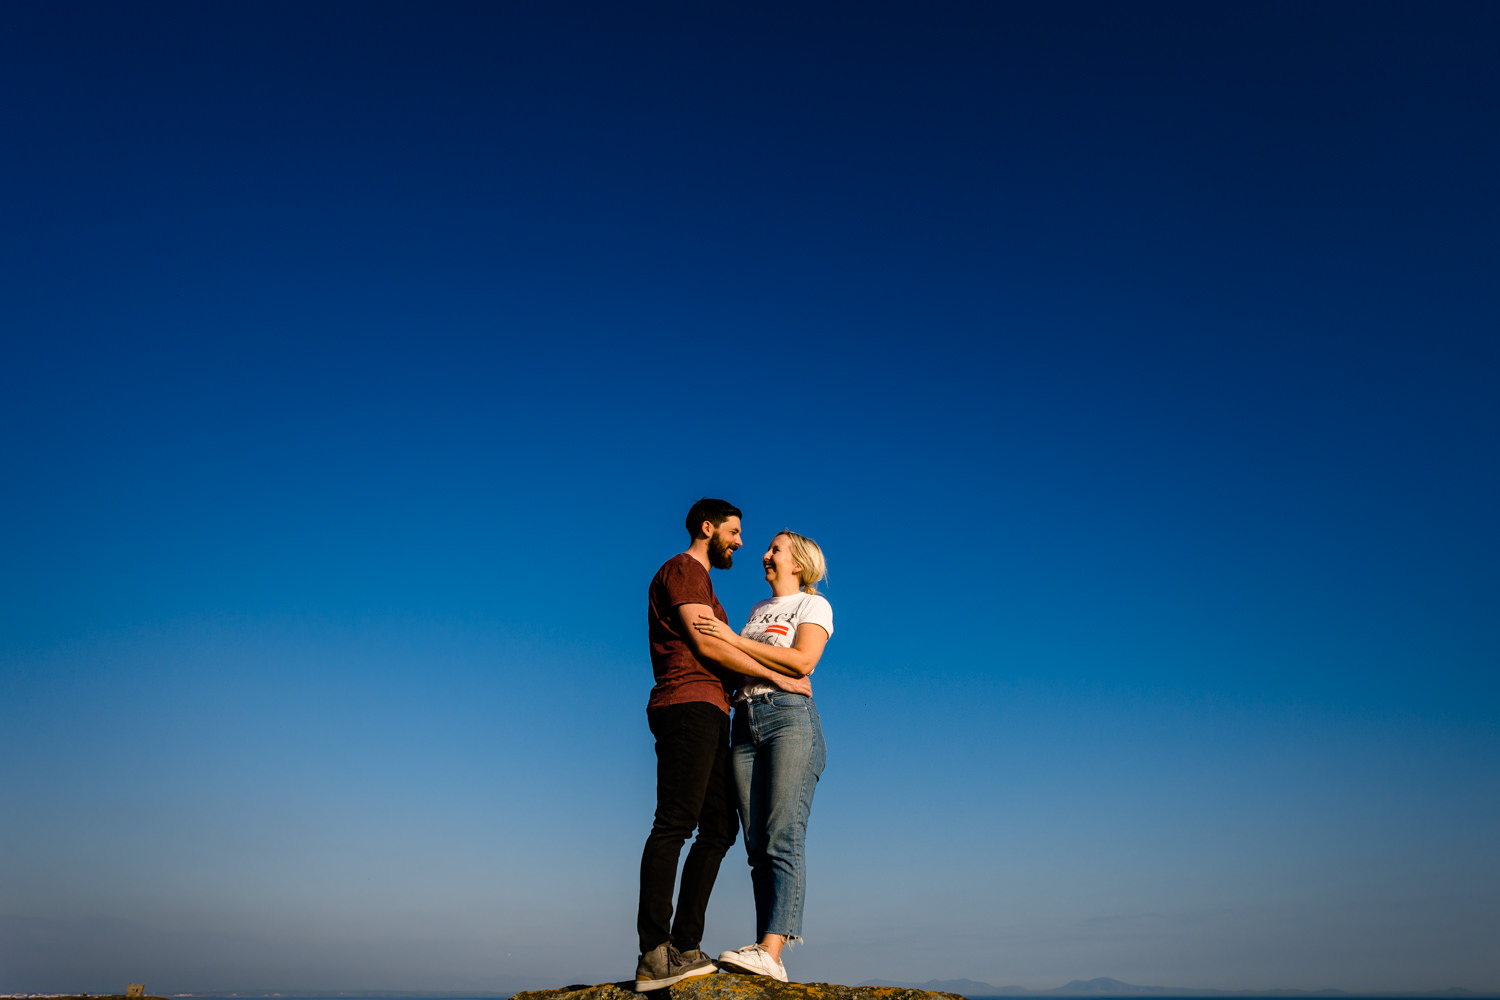 An engaged couple stood on a cliff in front of a blue sunny sky in Anglesey, Wales. By wedding photographers Zoe & Tom of About Today Photography.